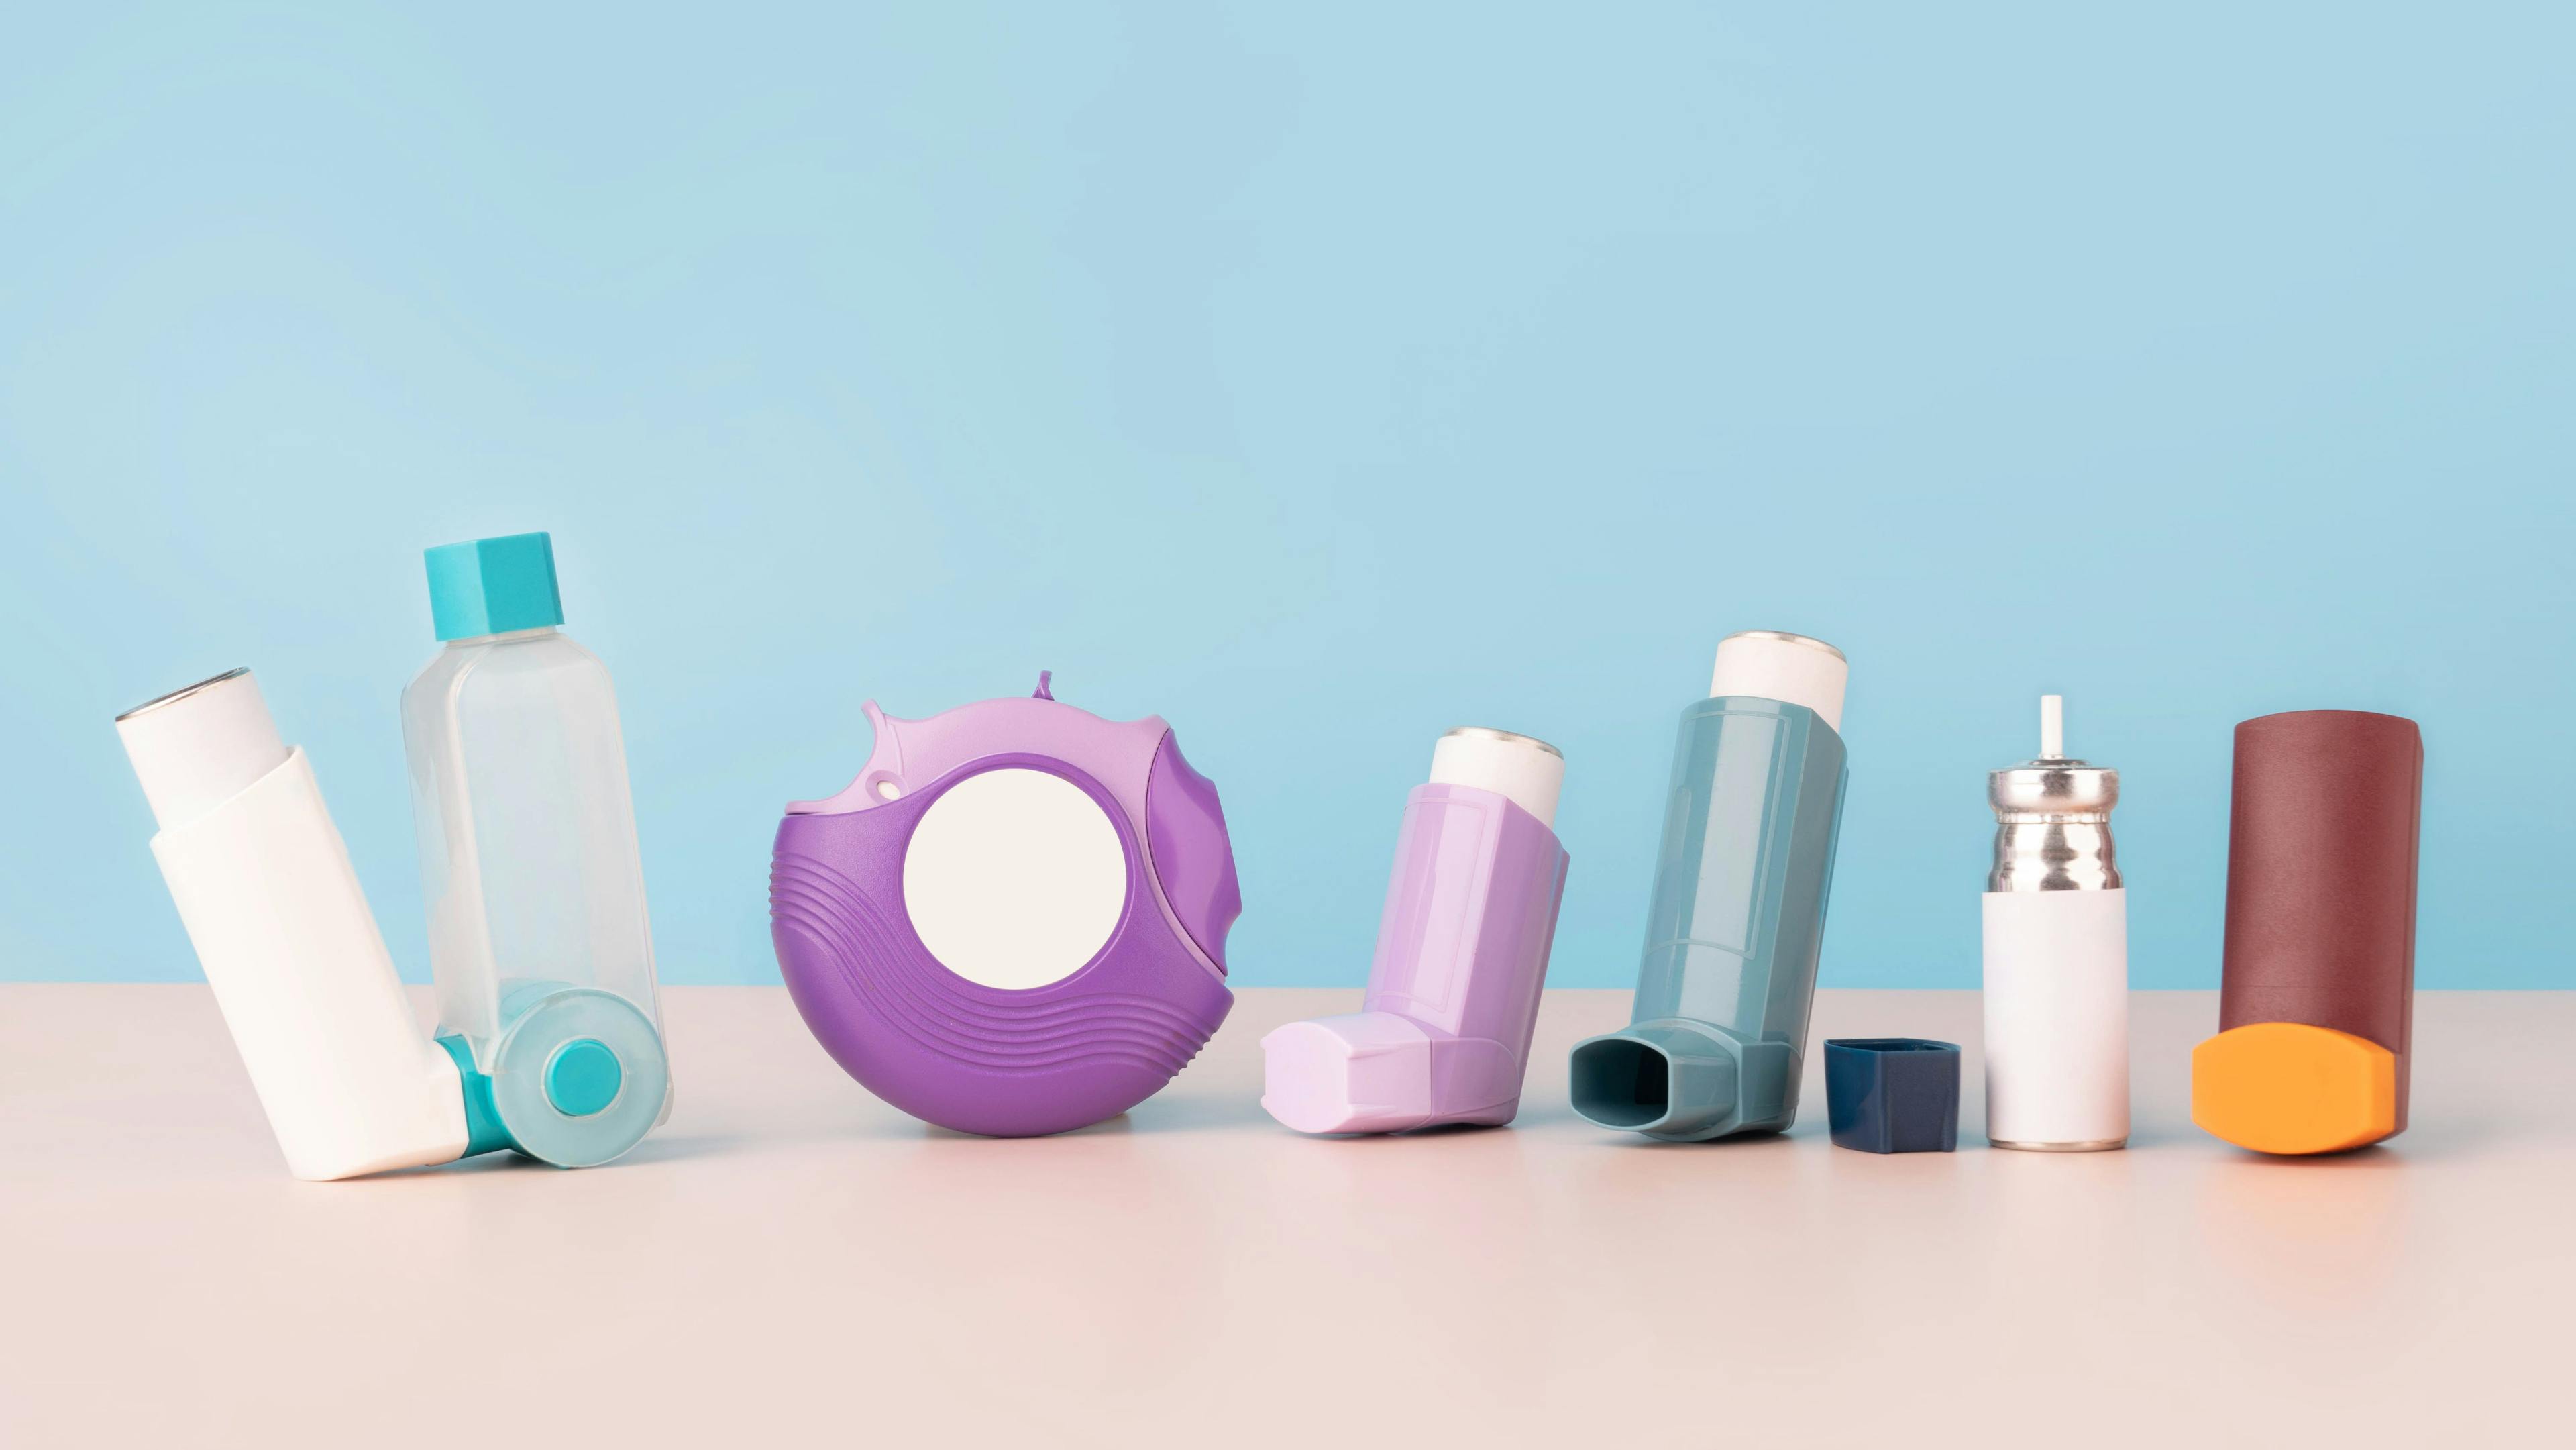 Boehringer Ingelheim's out-of-pocket cost cap will apply to all inhalers in the company's portfolio. | Image credit: Orawan - stock.adobe.com